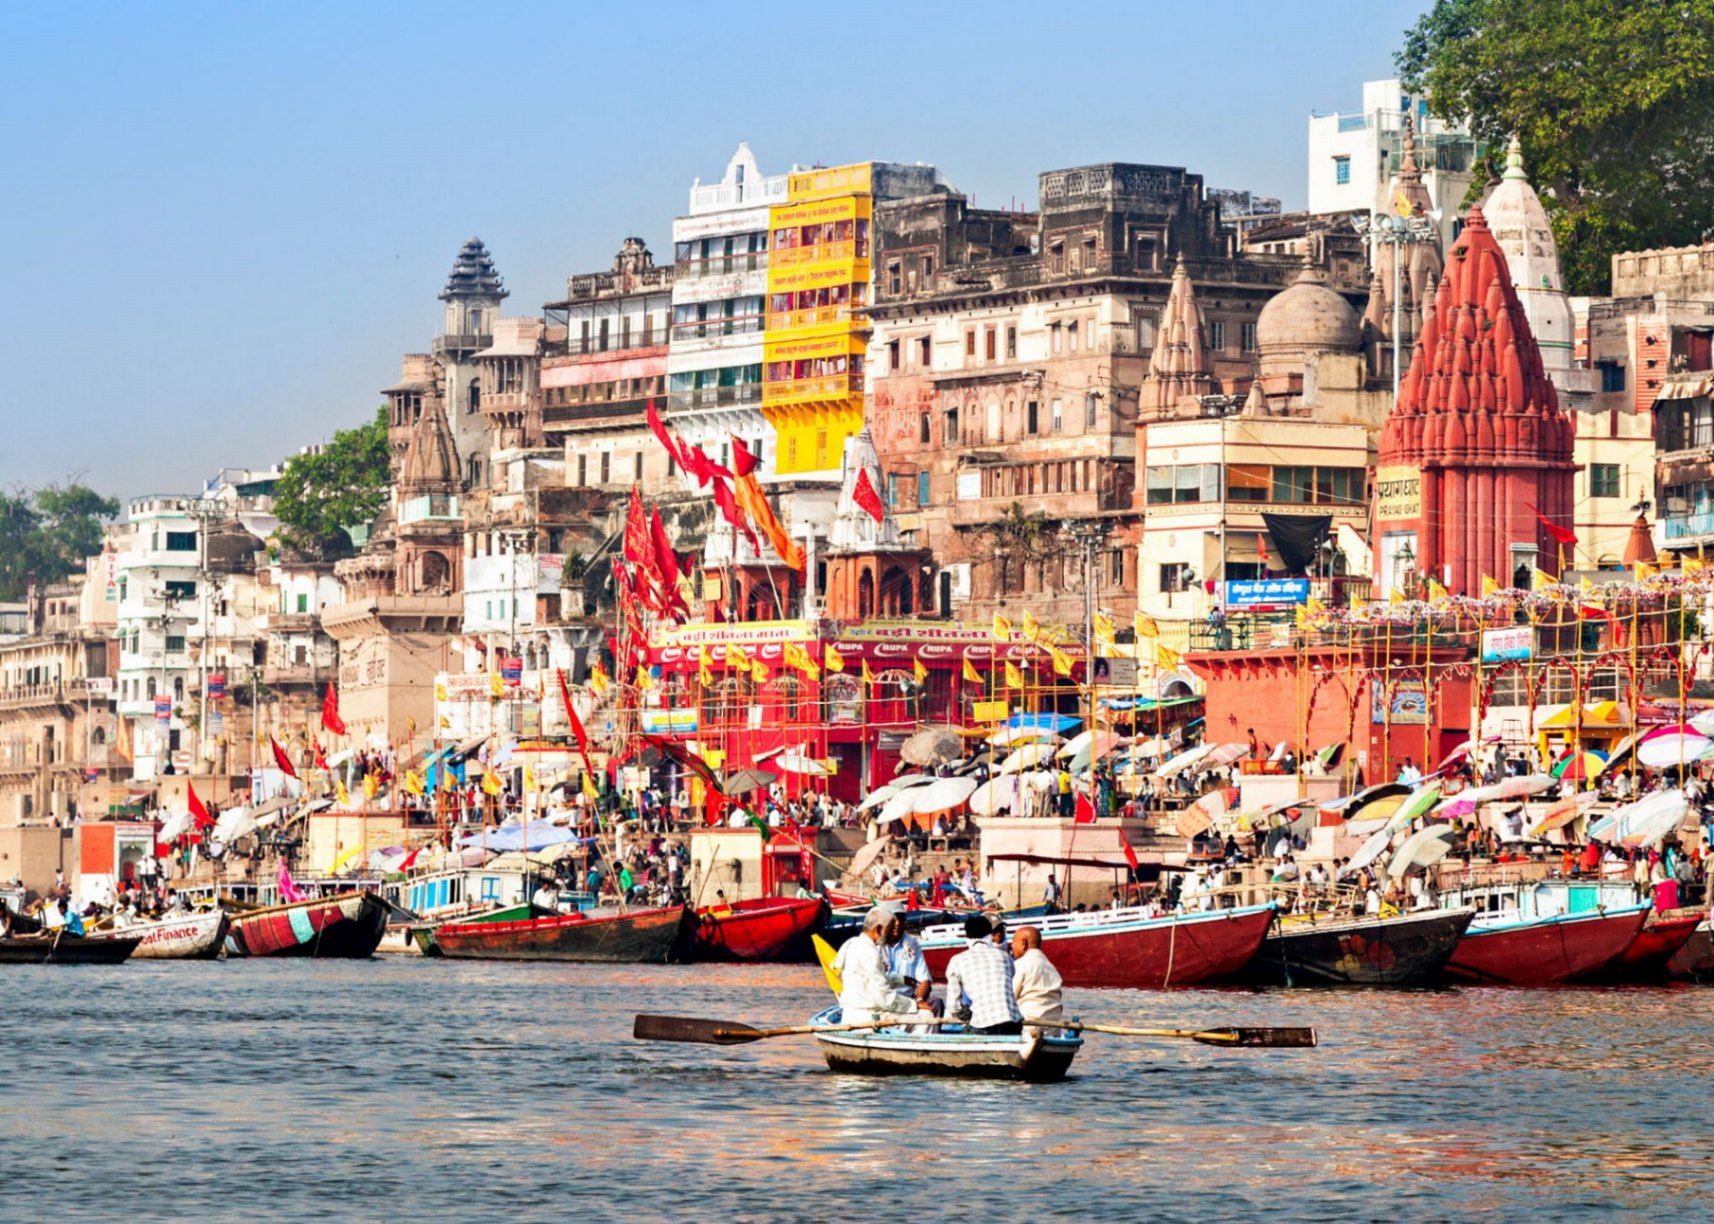 The lively atmosphere of the Dasaswamedh Ghat makes it one of the best places to visit in Varanasi. This tourist attraction is a swirling hodgepodge of flower sellers touting bright blossoms, boat operators hawking rides along the Ganges River, and sadhus (holy men) with face paint. You can spend...